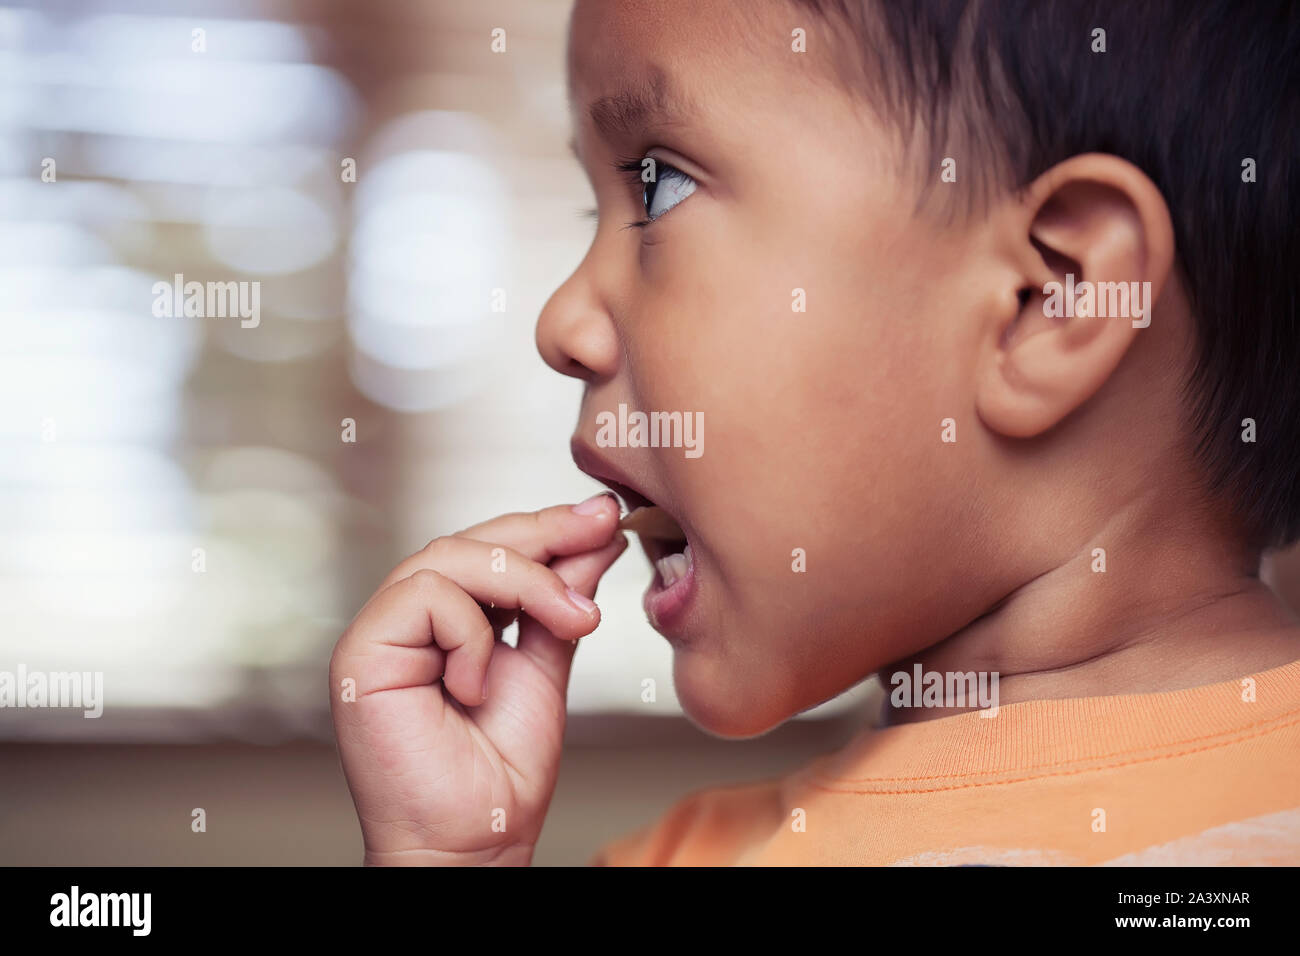 A profile view of a little kid putting a potato chip in his mouth to eat. Stock Photo